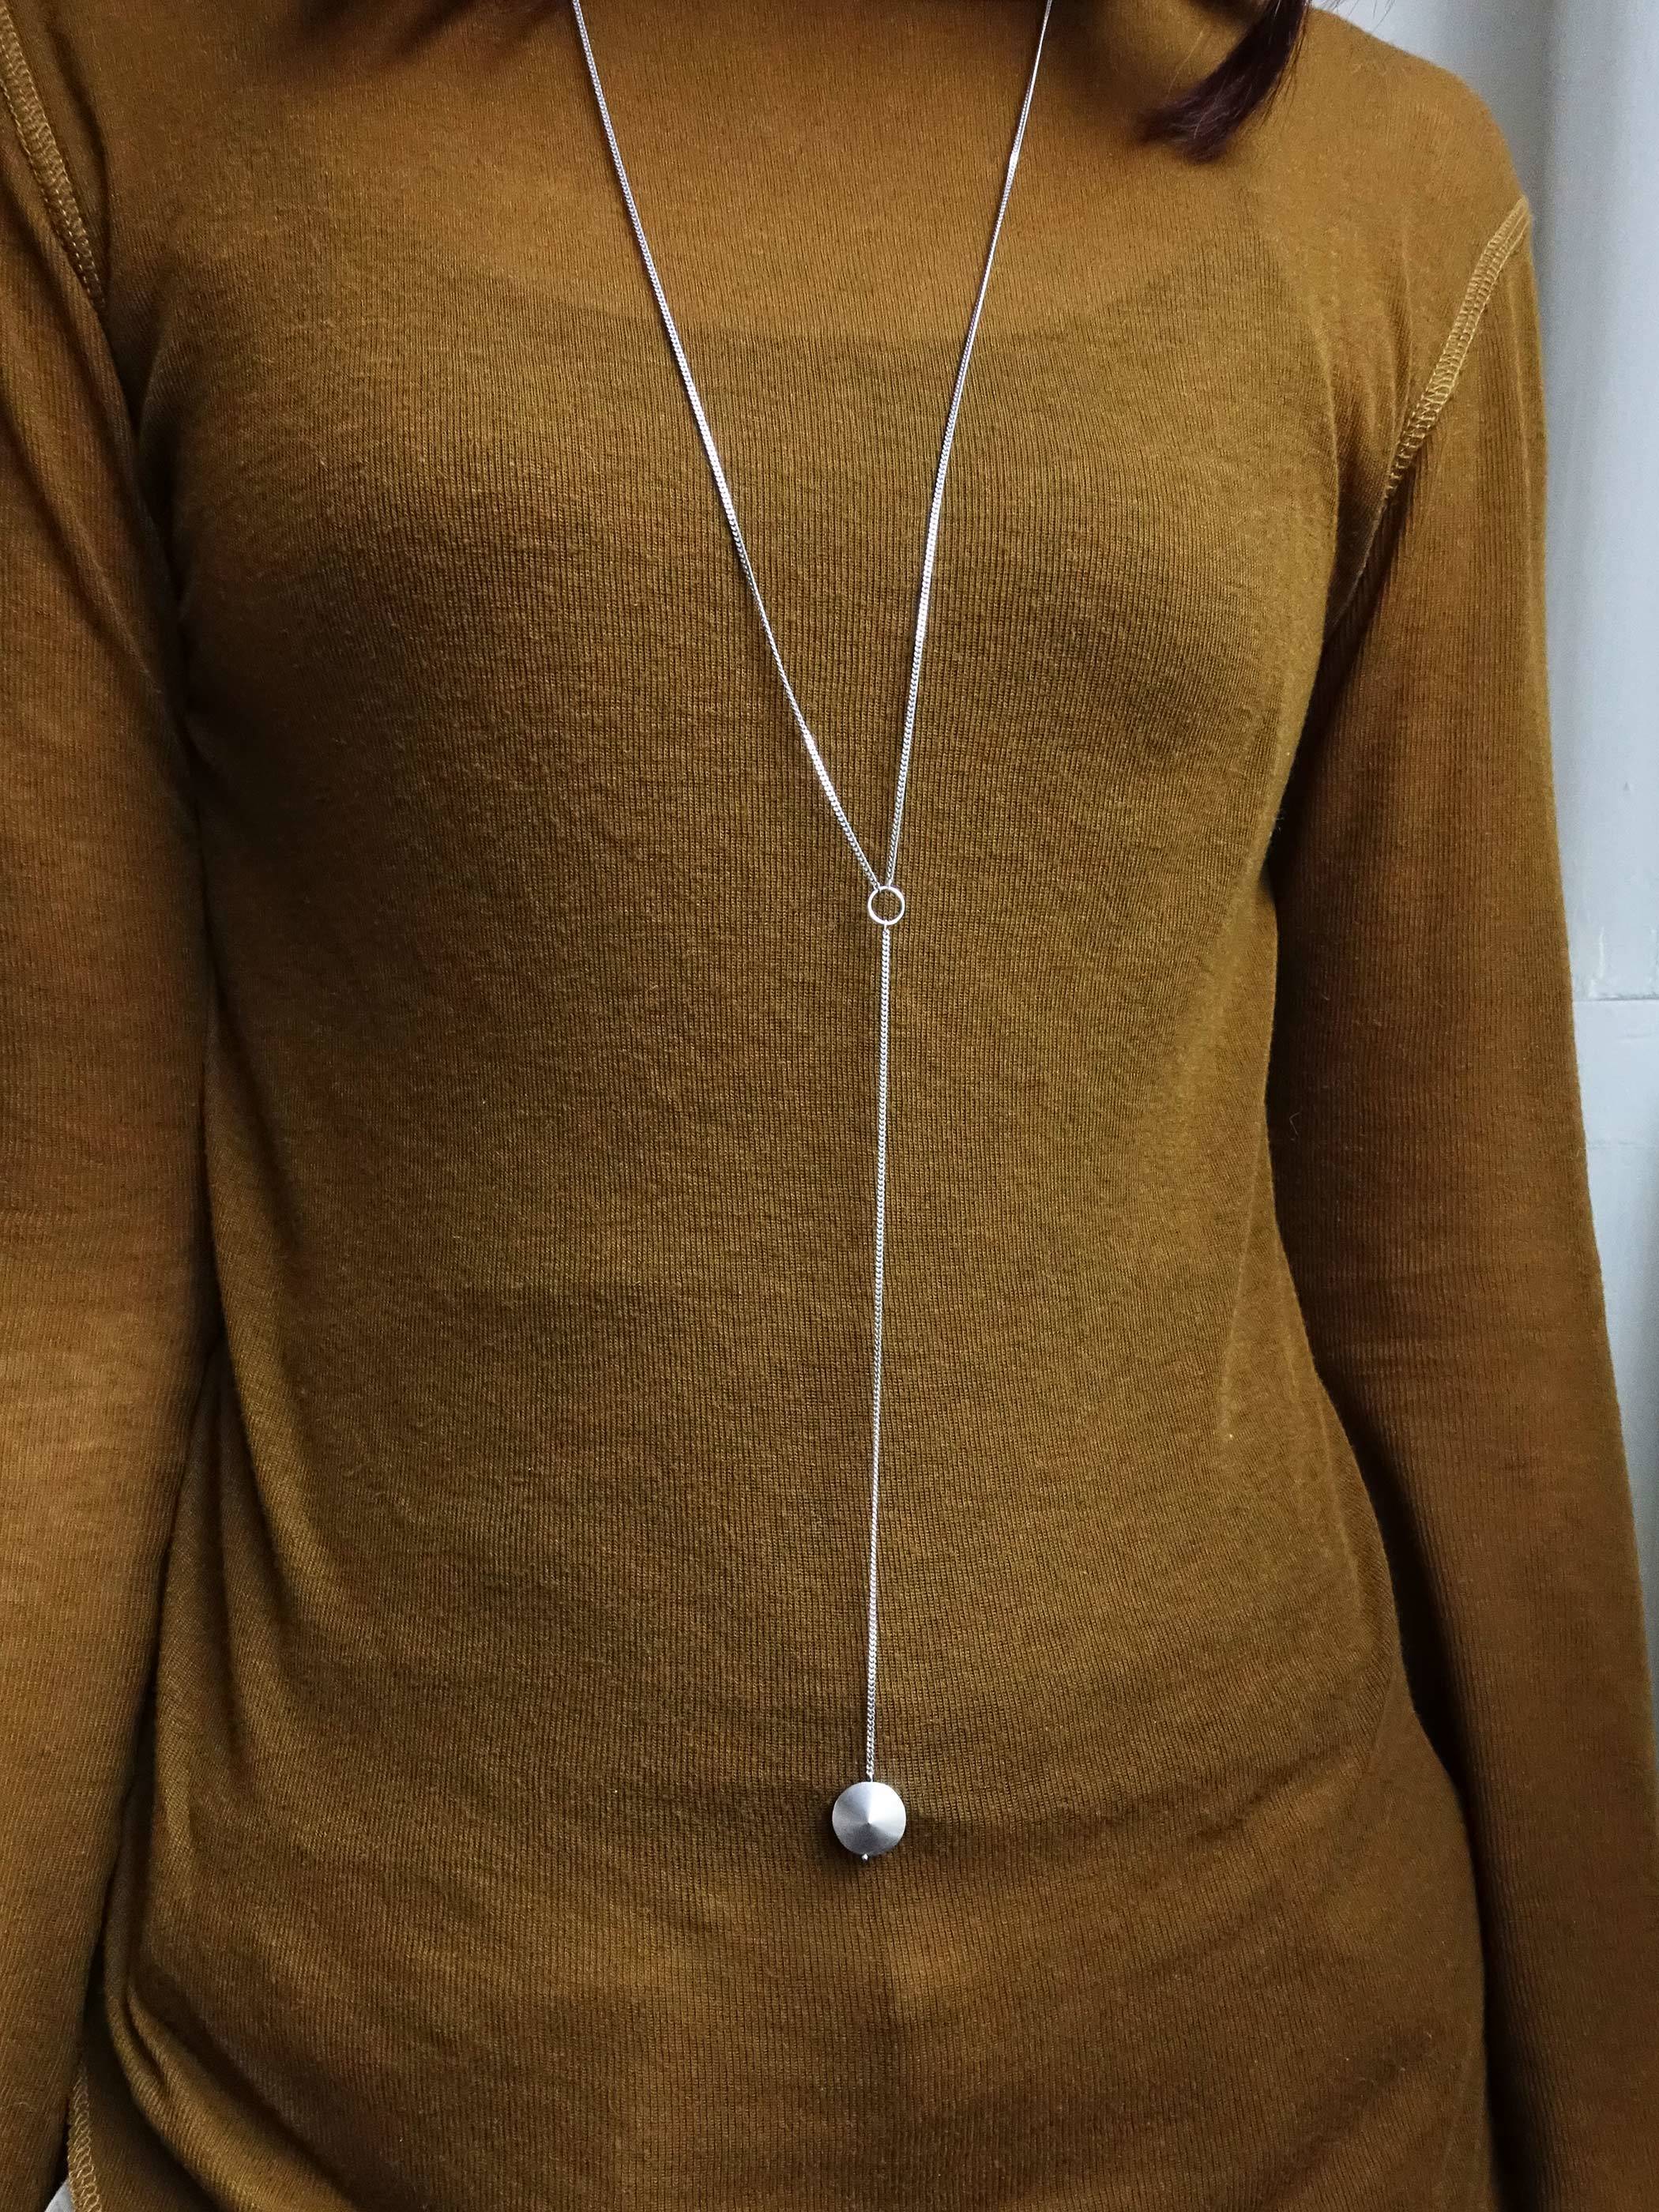 PYRAMID turning necklace［PY3-04 Silver］ネックレス